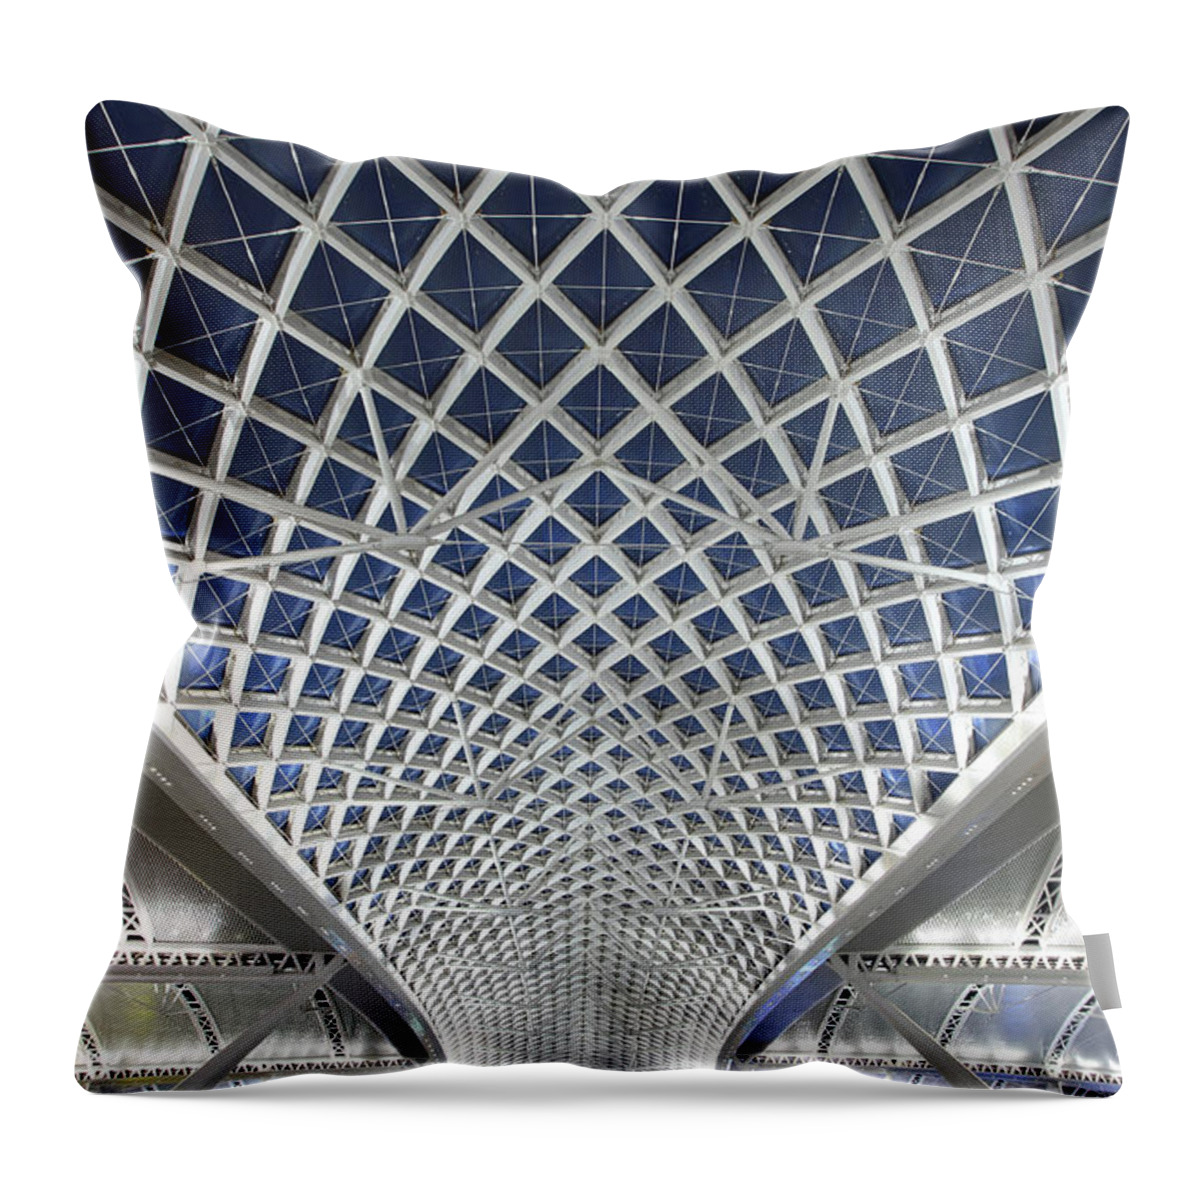 Chinese Culture Throw Pillow featuring the photograph Guangzhou Railway Station by Real444